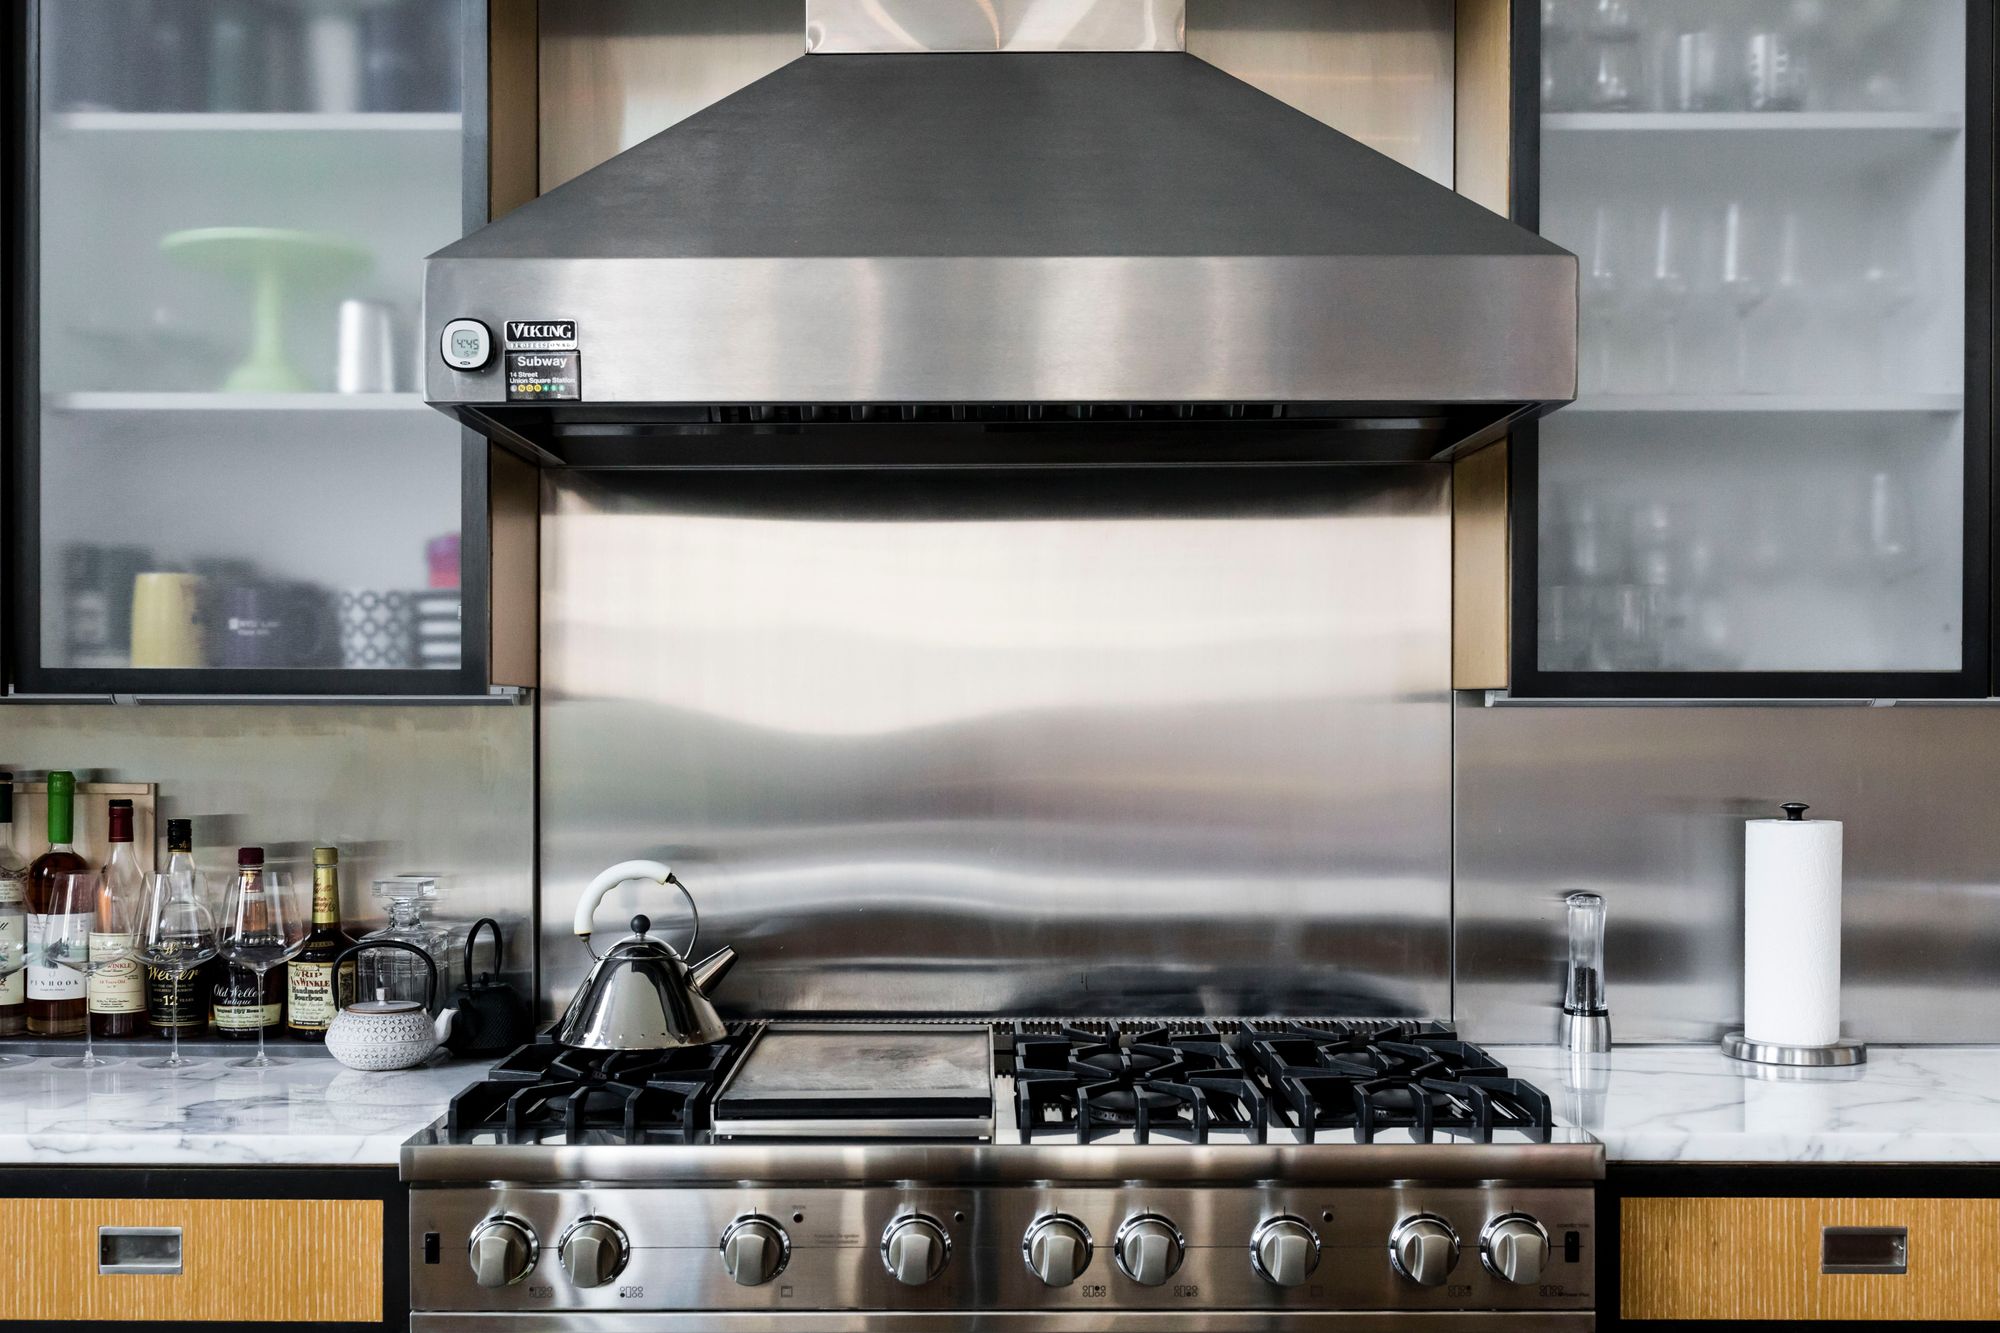 AJ Madison is Your New Favorite Retailer for Home Appliances